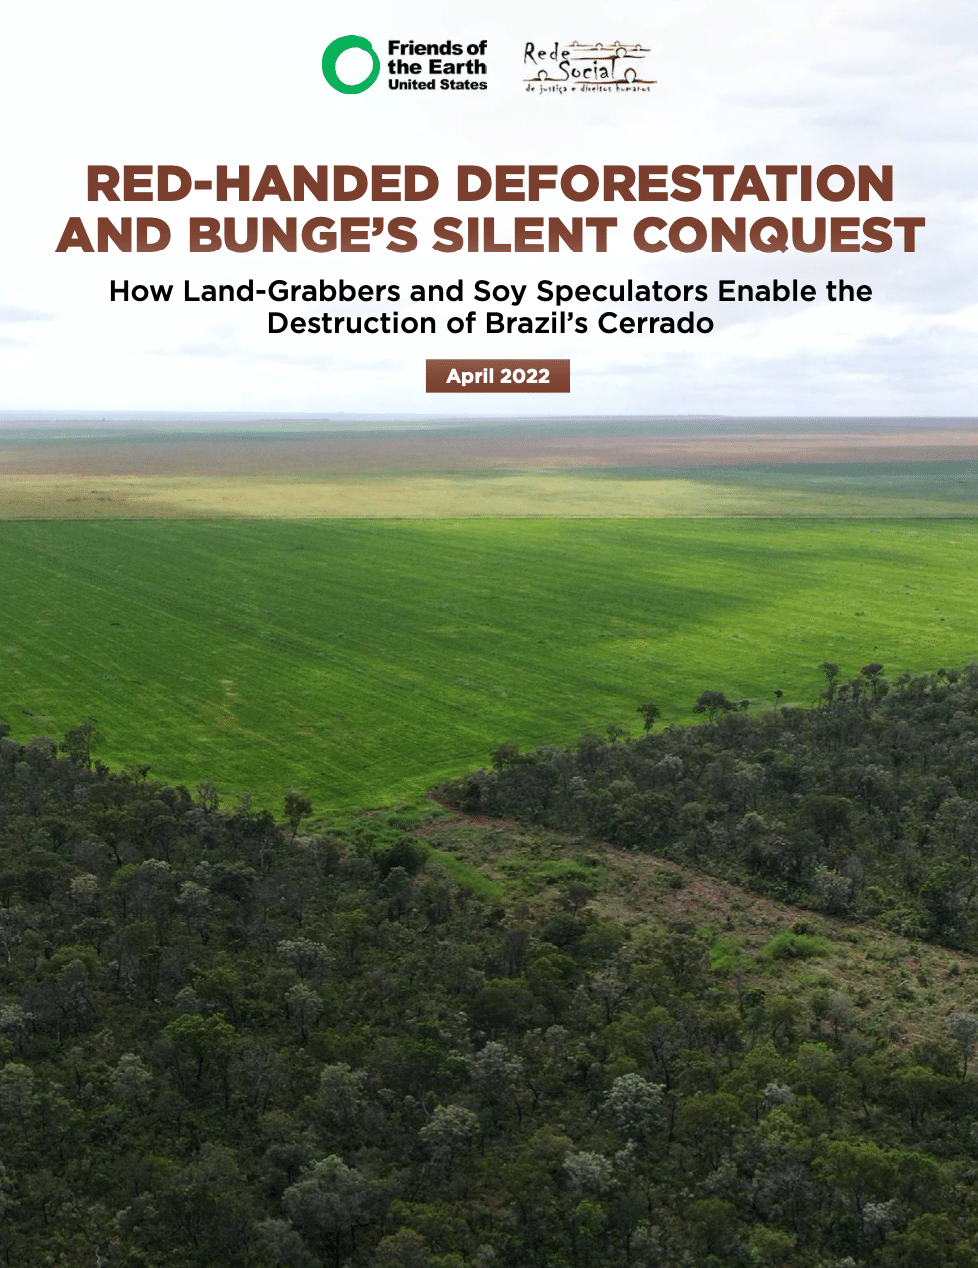 Caught Red-Handed: Bunge and the Directors of Deforestation